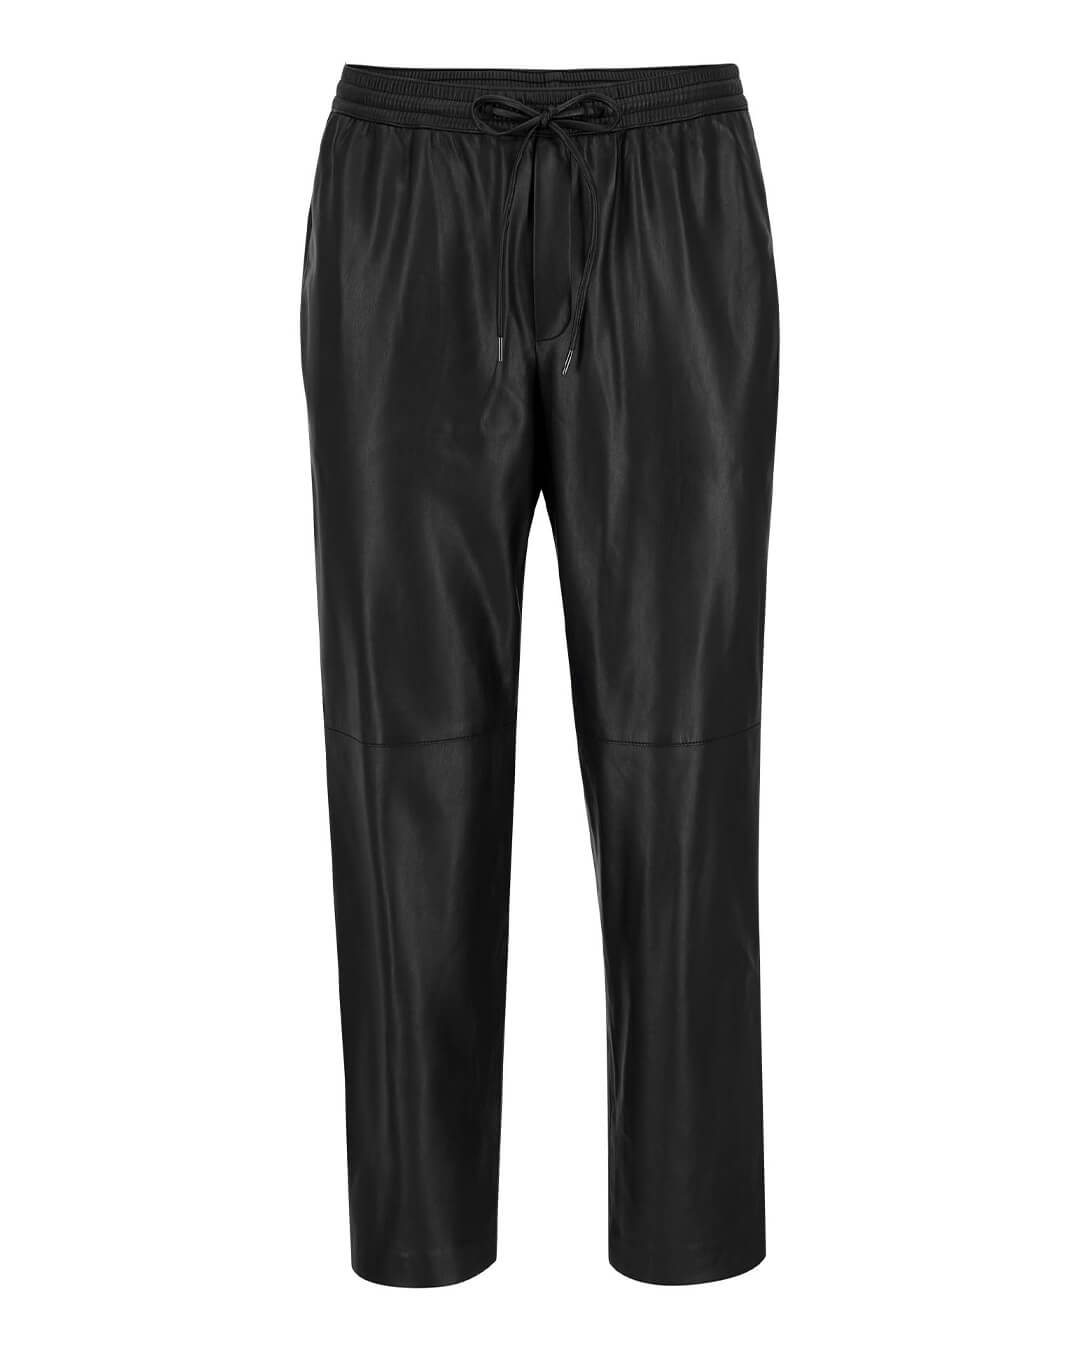 Fynch-Hatton Trousers Fynch-Hatton Black Leather Optic Joggers